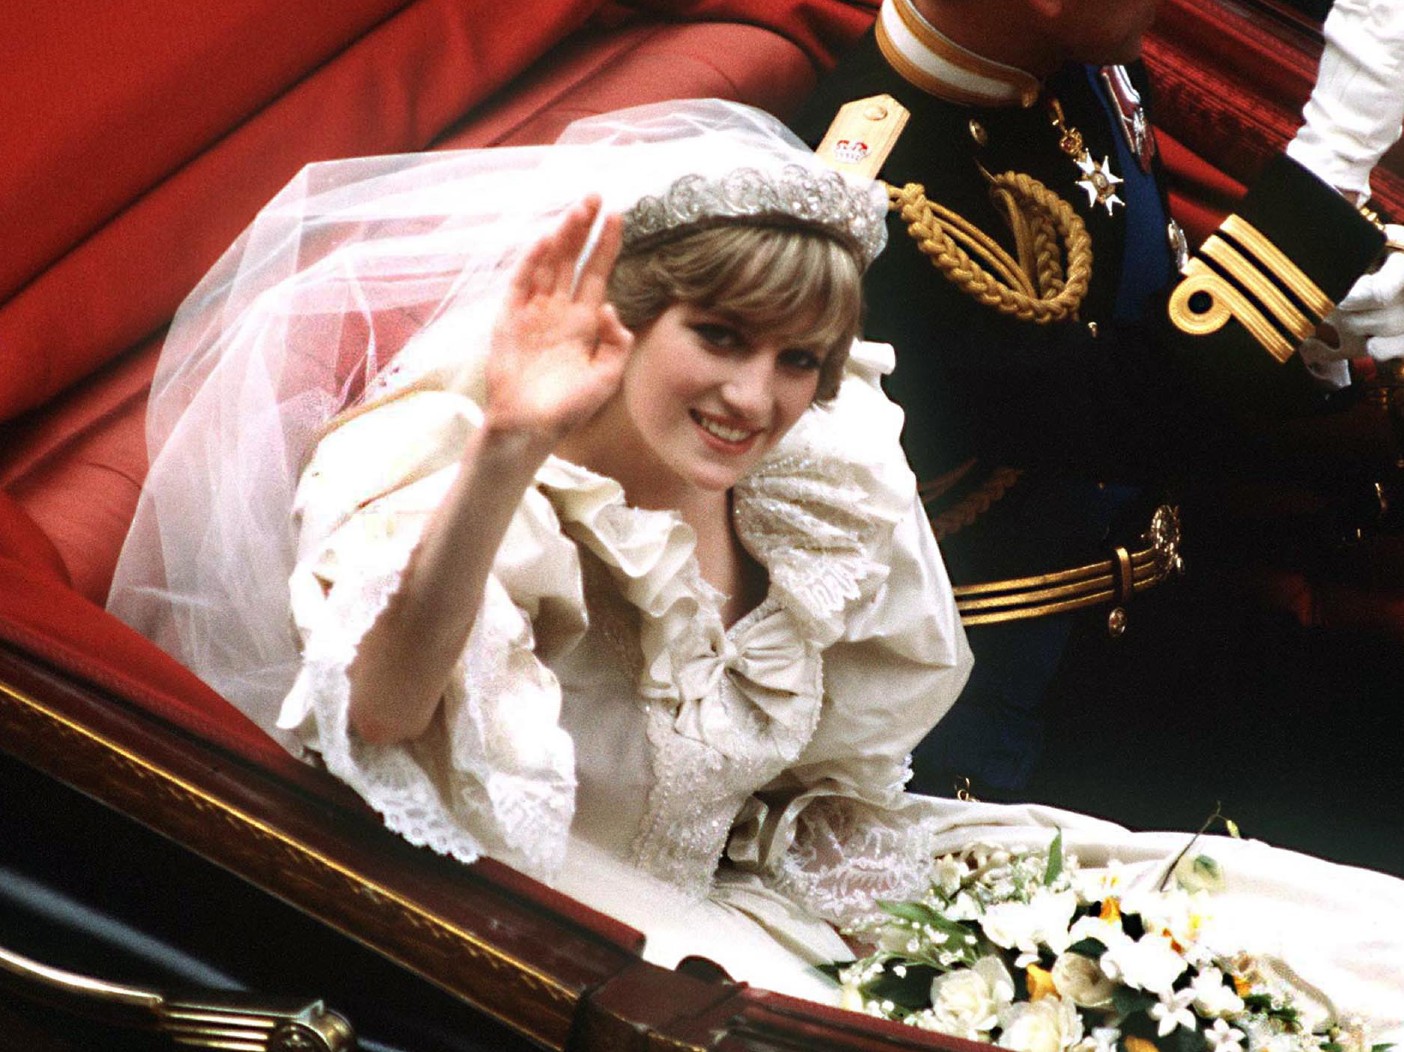 The Empowering Decision Princess Diana made with her Wedding Vows